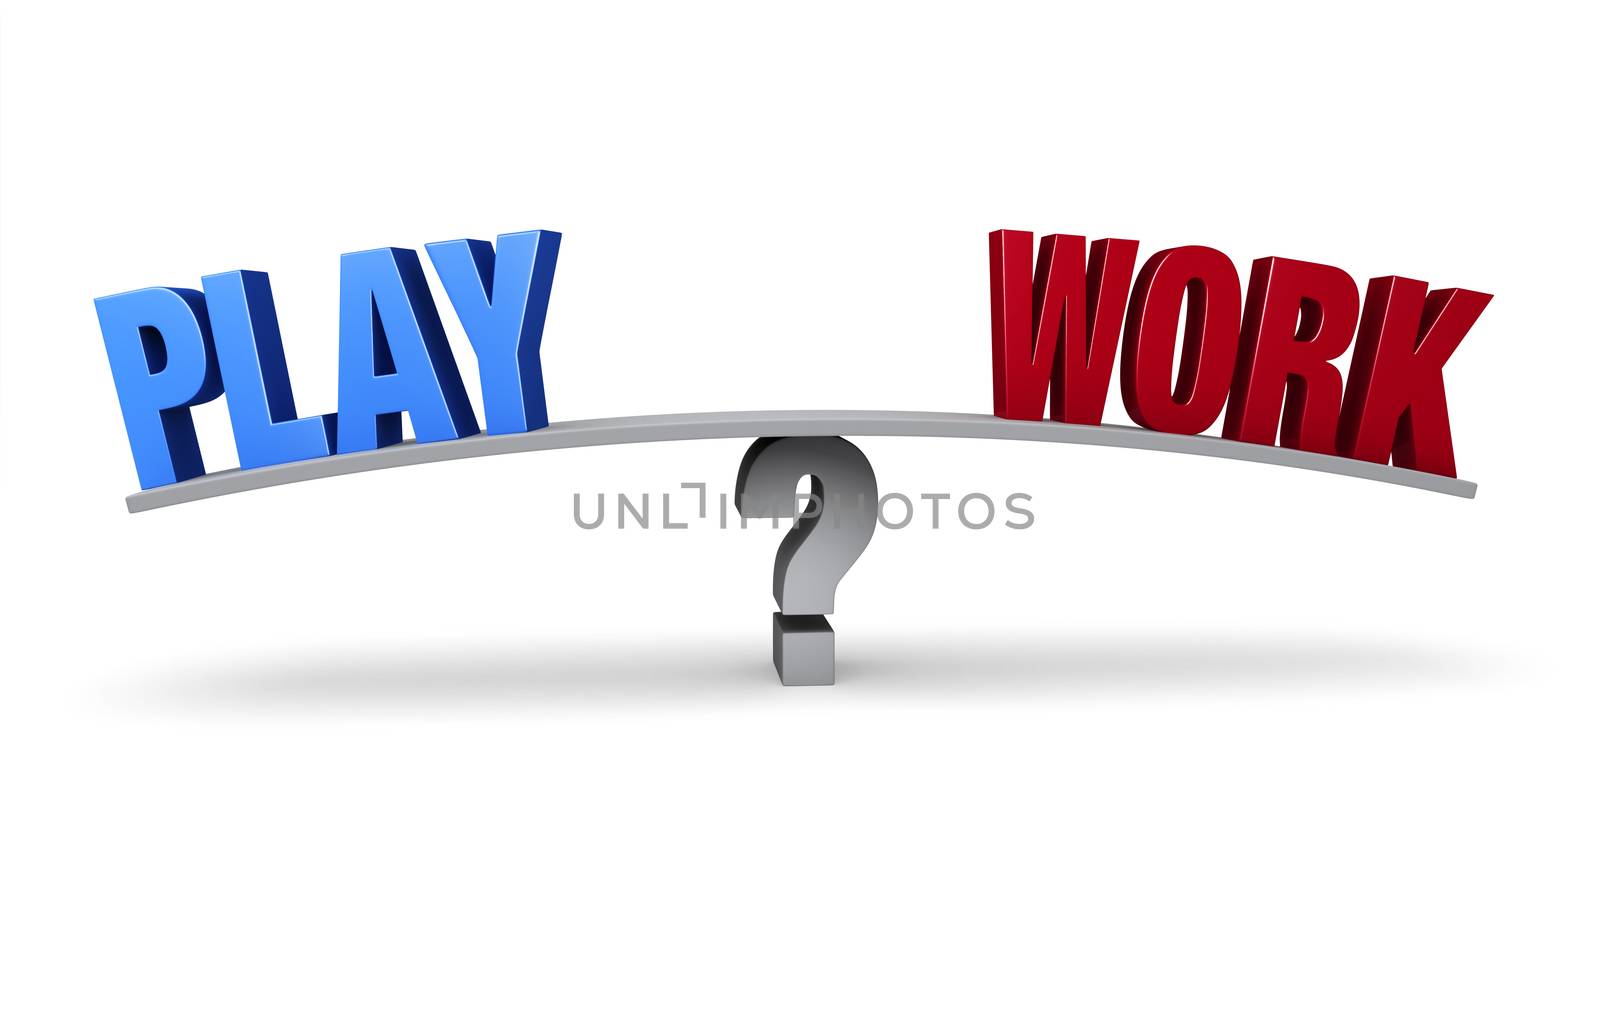 A bright blue "PLAY" and a red "WORK" sit on opposite ends of a gray board which is balanced on a gray question mark. Isolated on white.